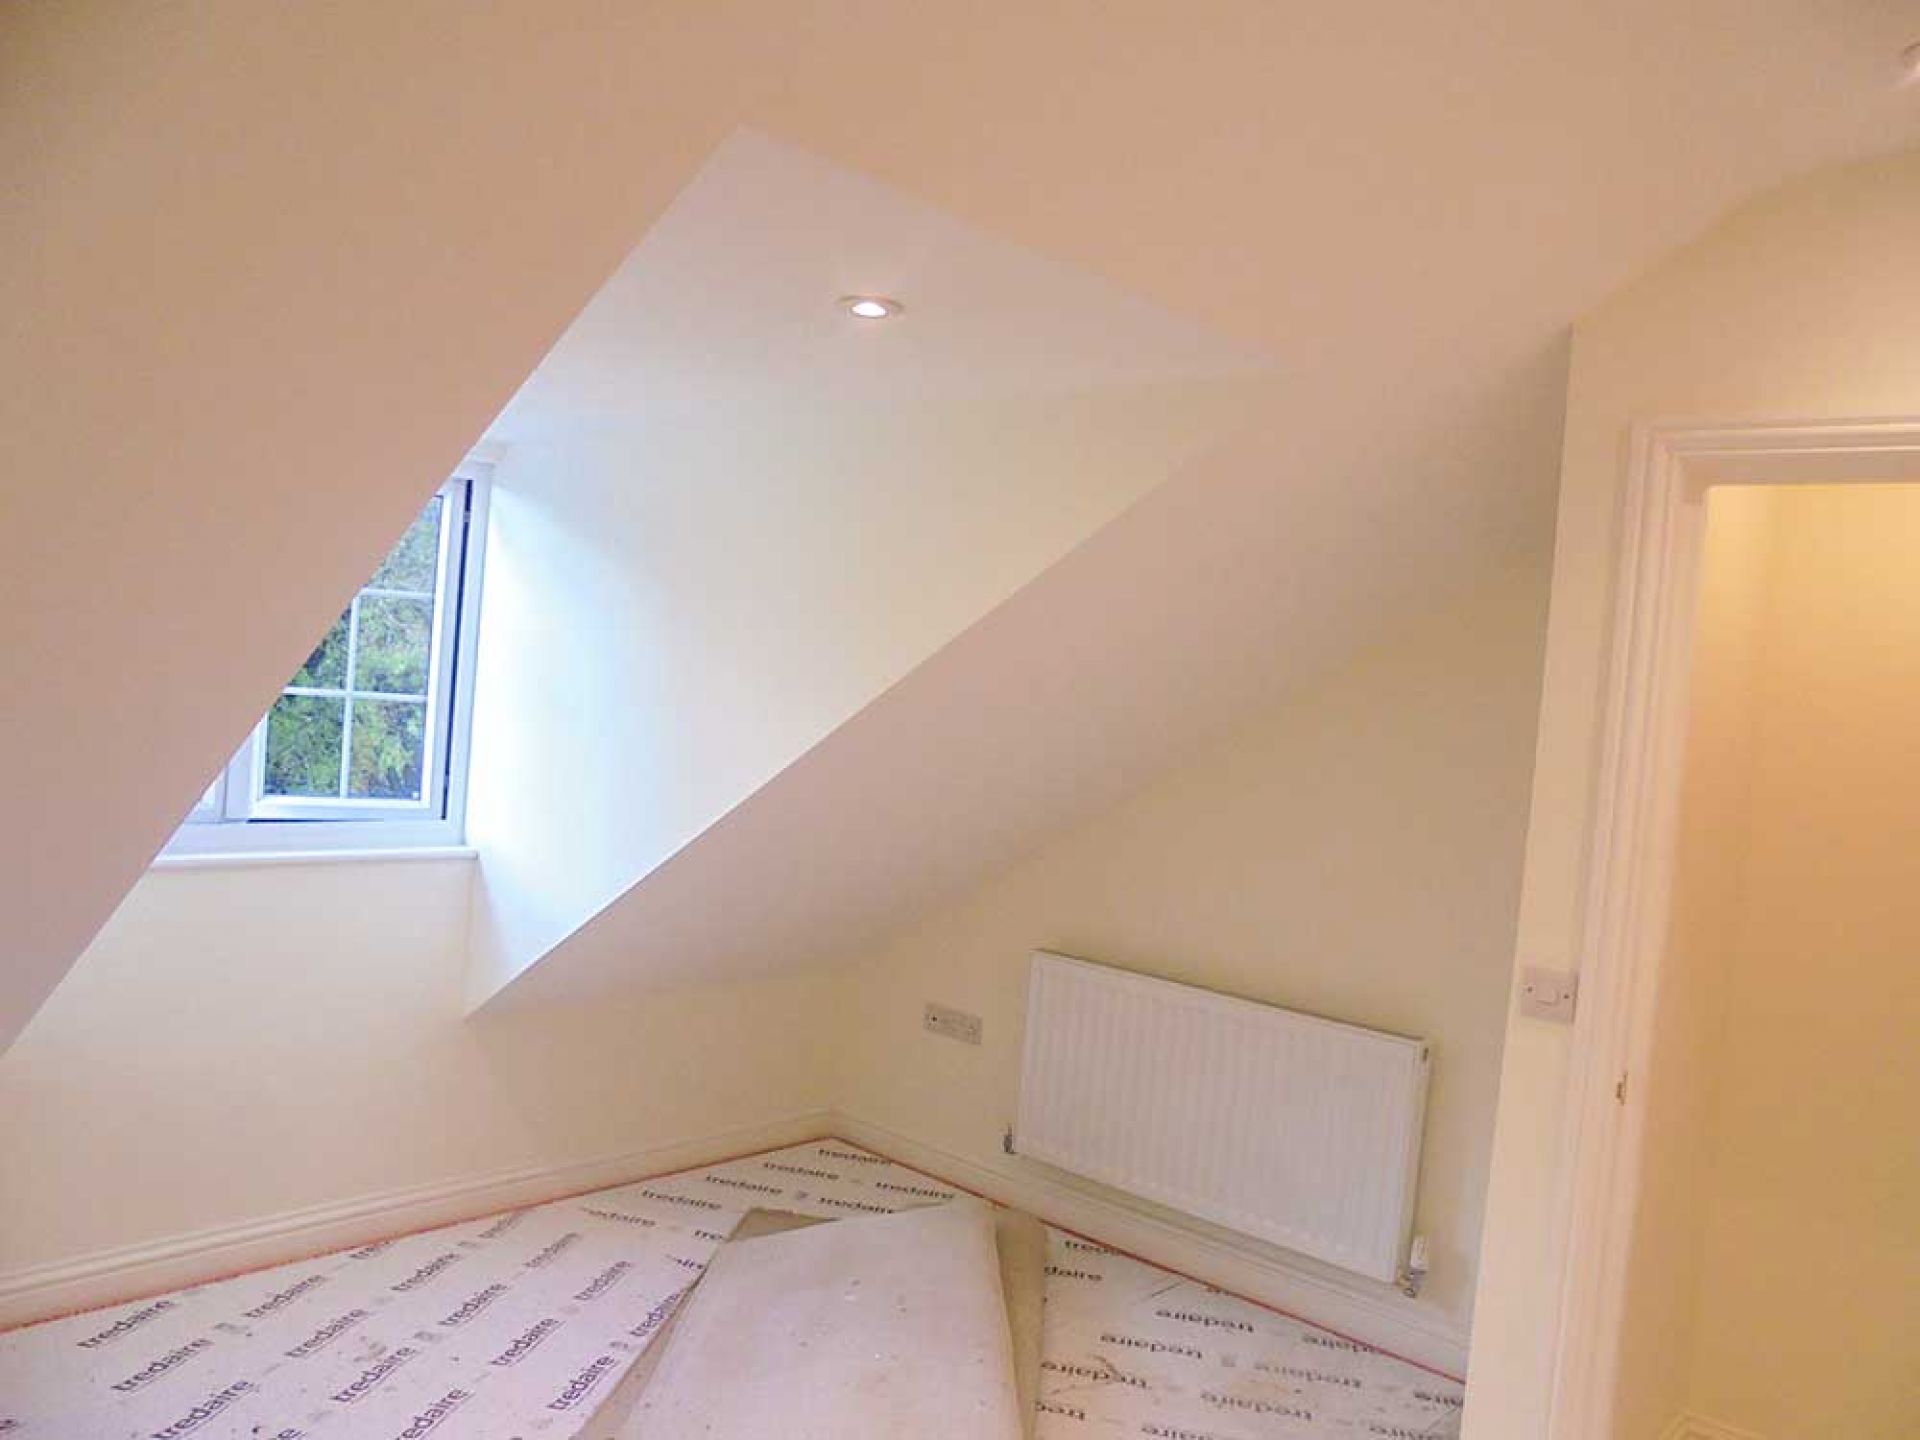 Completed plastering and painting in upstairs bedroom with spot lights and window.